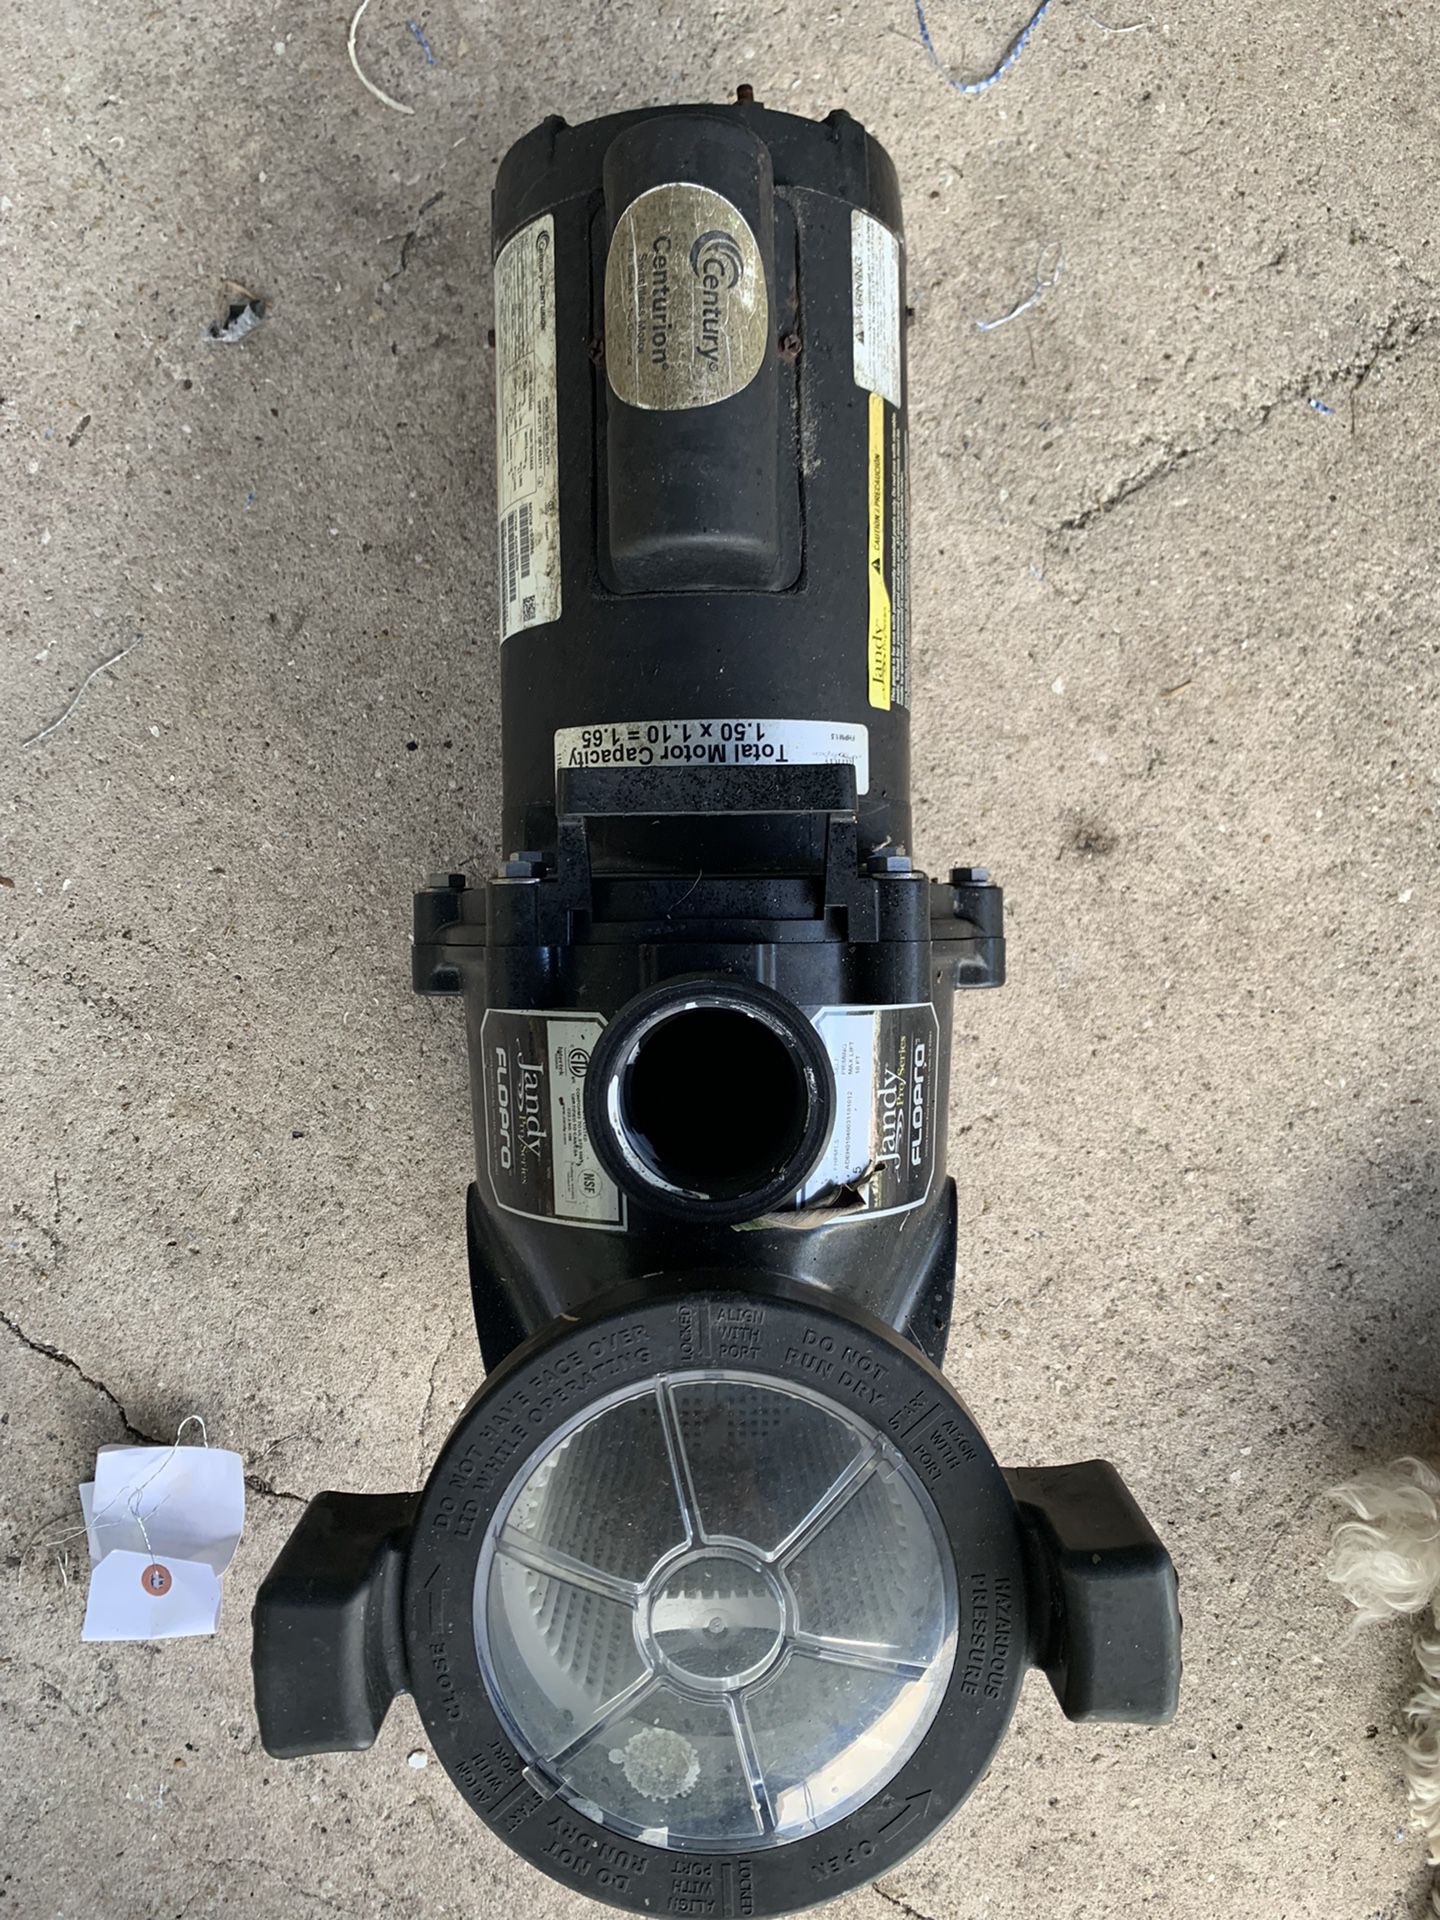 Used swimming pool motor or compressor I do not know if it is good if it is good excellent if it is not you can use it for parts